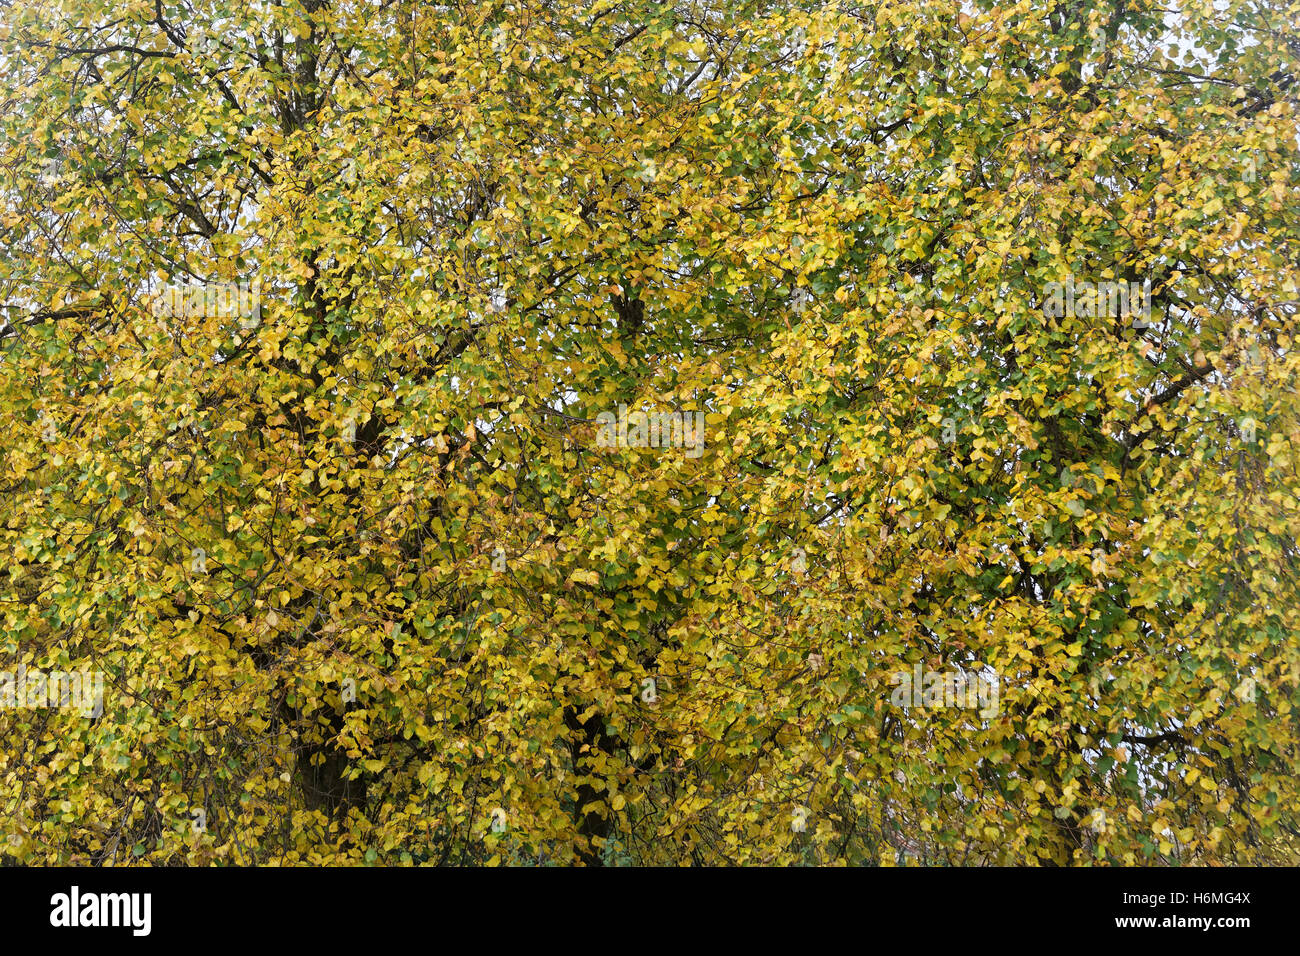 Autumn foliage trees golden leaves patterns and color Stock Photo